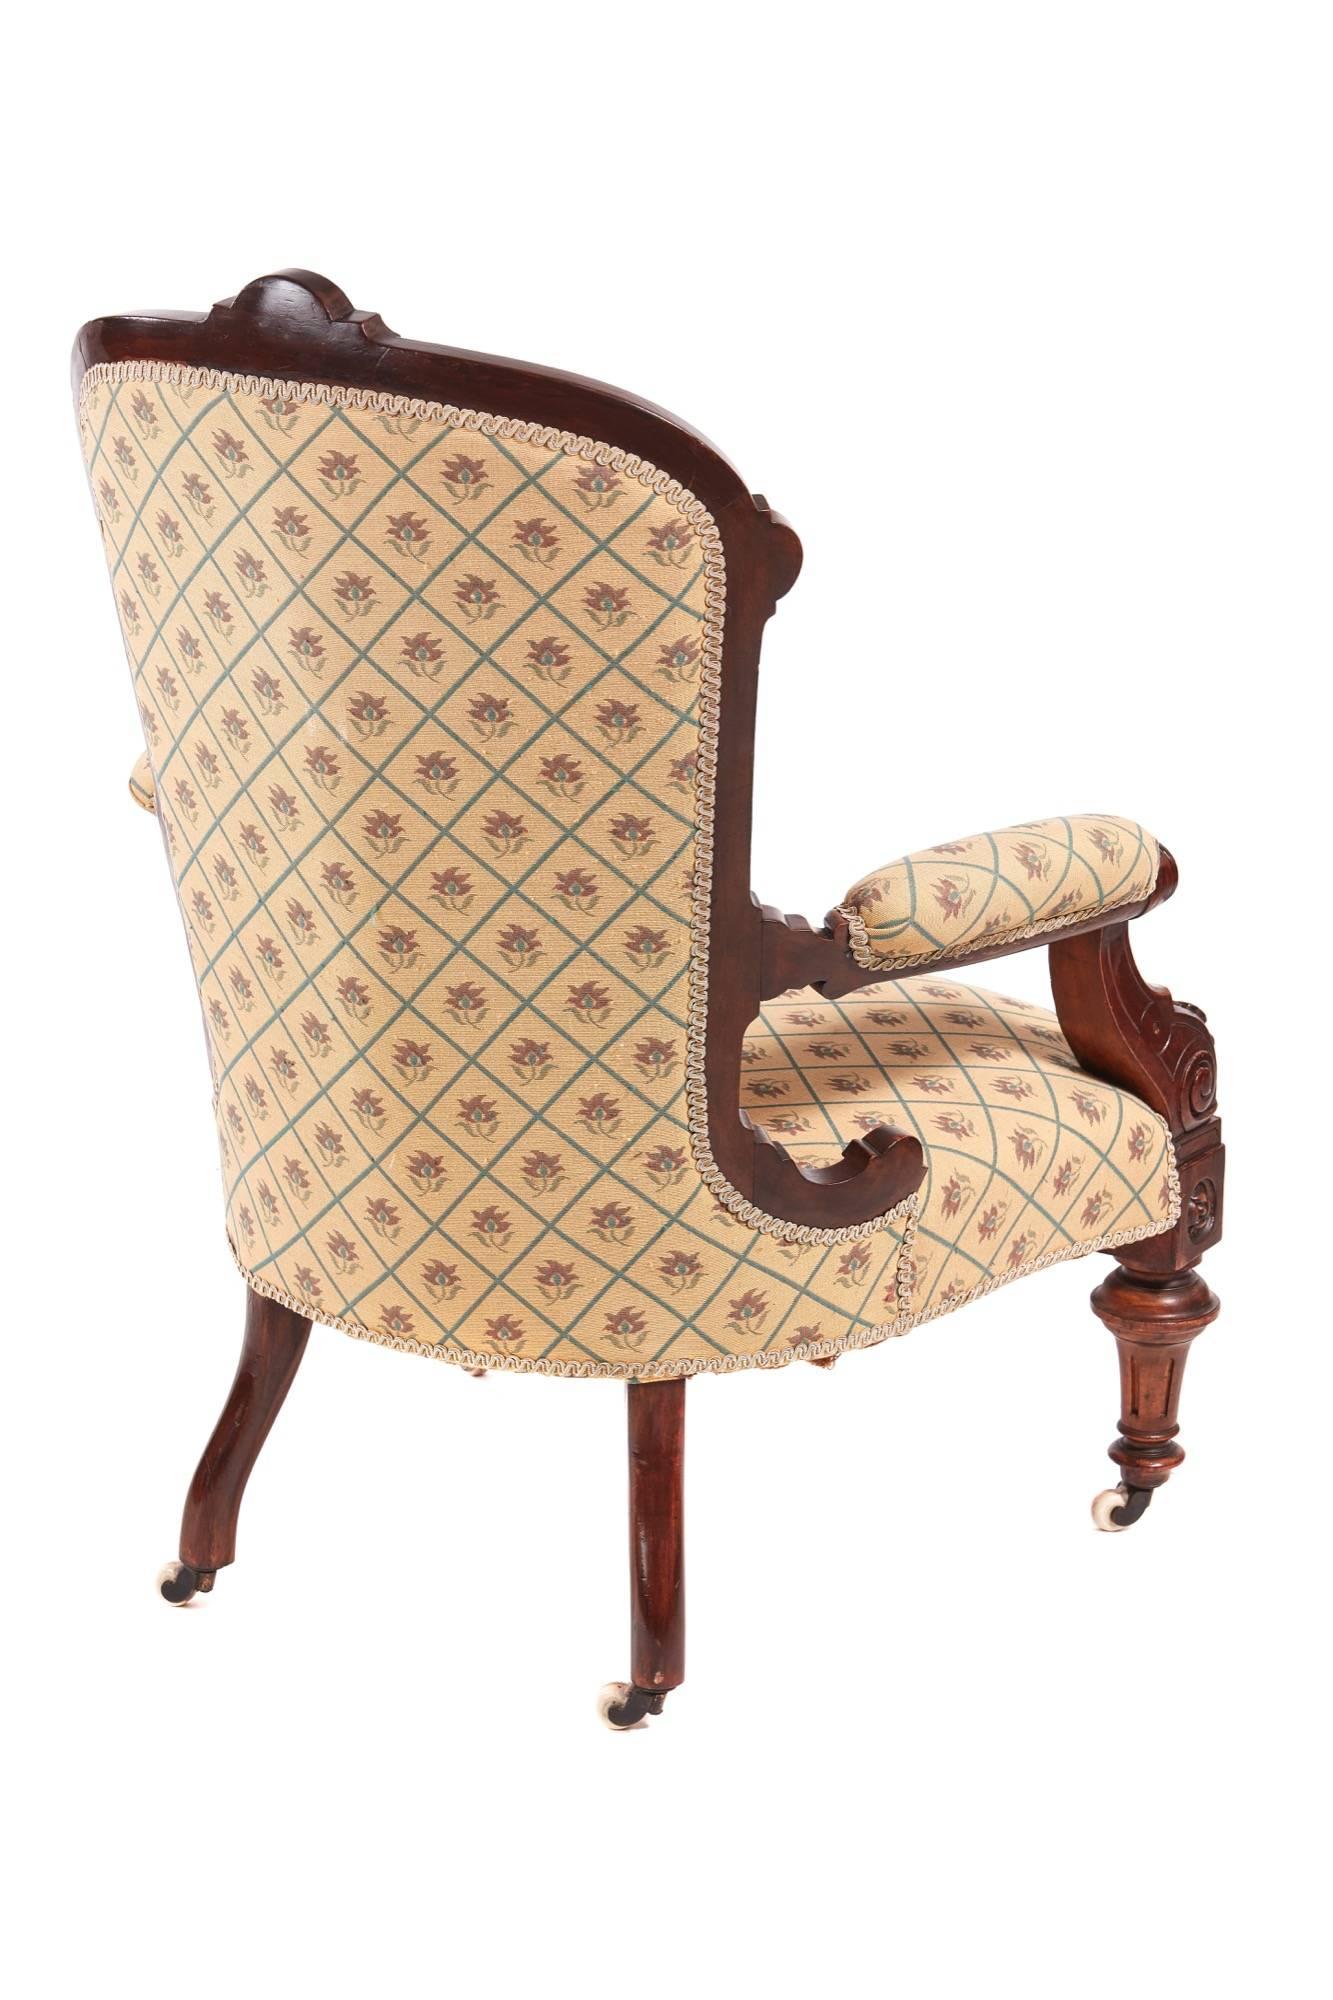 Quality Victorian carved walnut turned leg armchair, with a walnut framed back carved top rail lovely carved open arms turned reeded legs to the front outswept back legs, original castors.